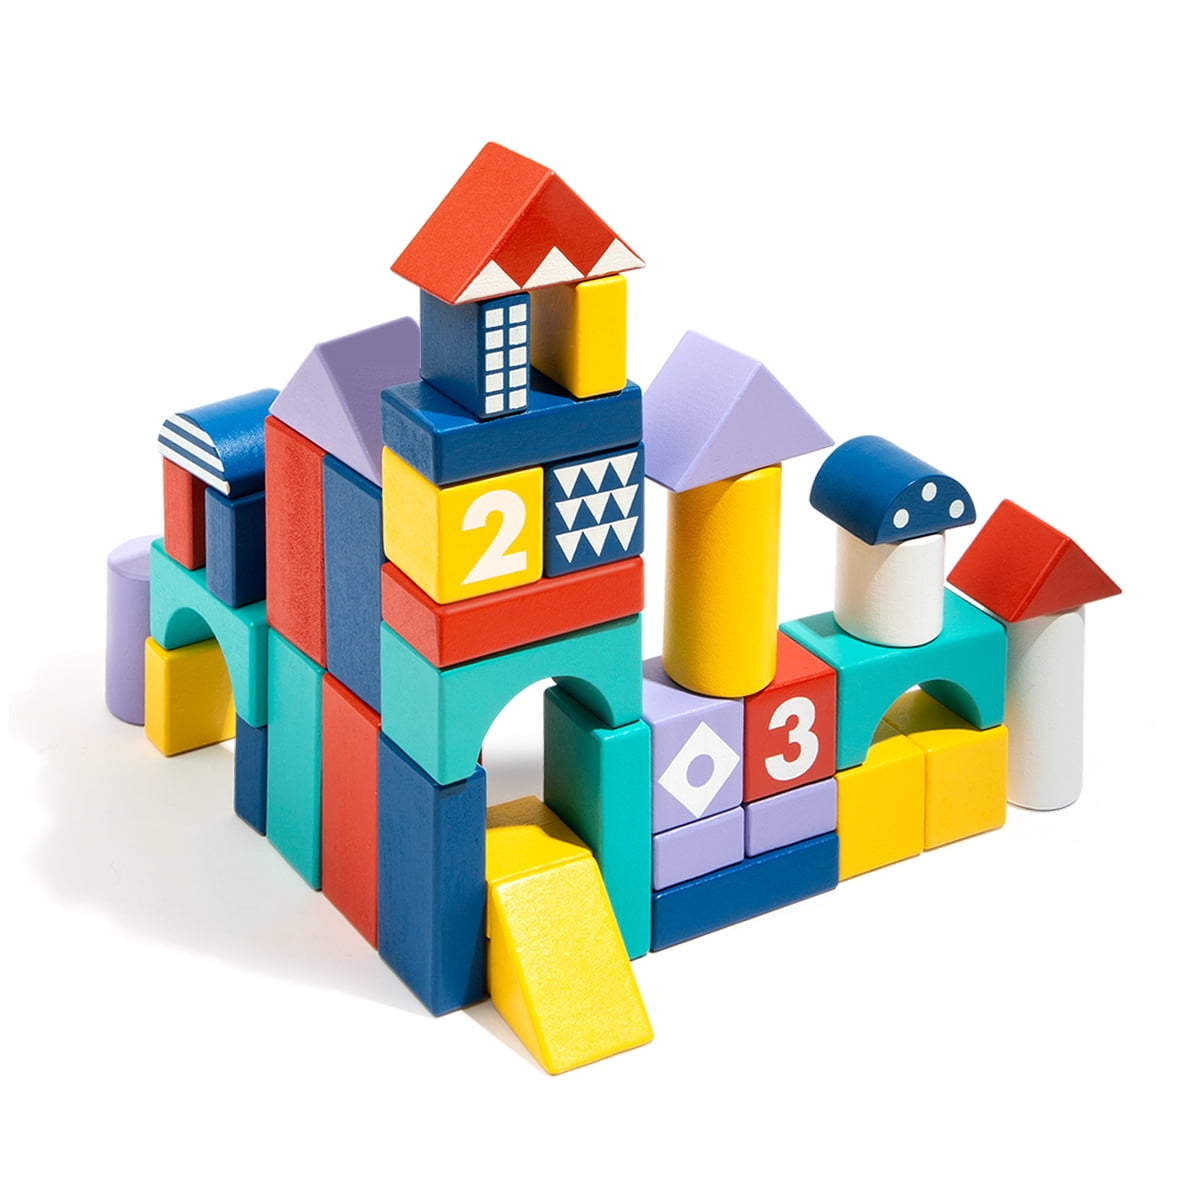 Details about   Colorful Building Blocks Wooden Blocks For Kids Gifts Boys Educational Toys 